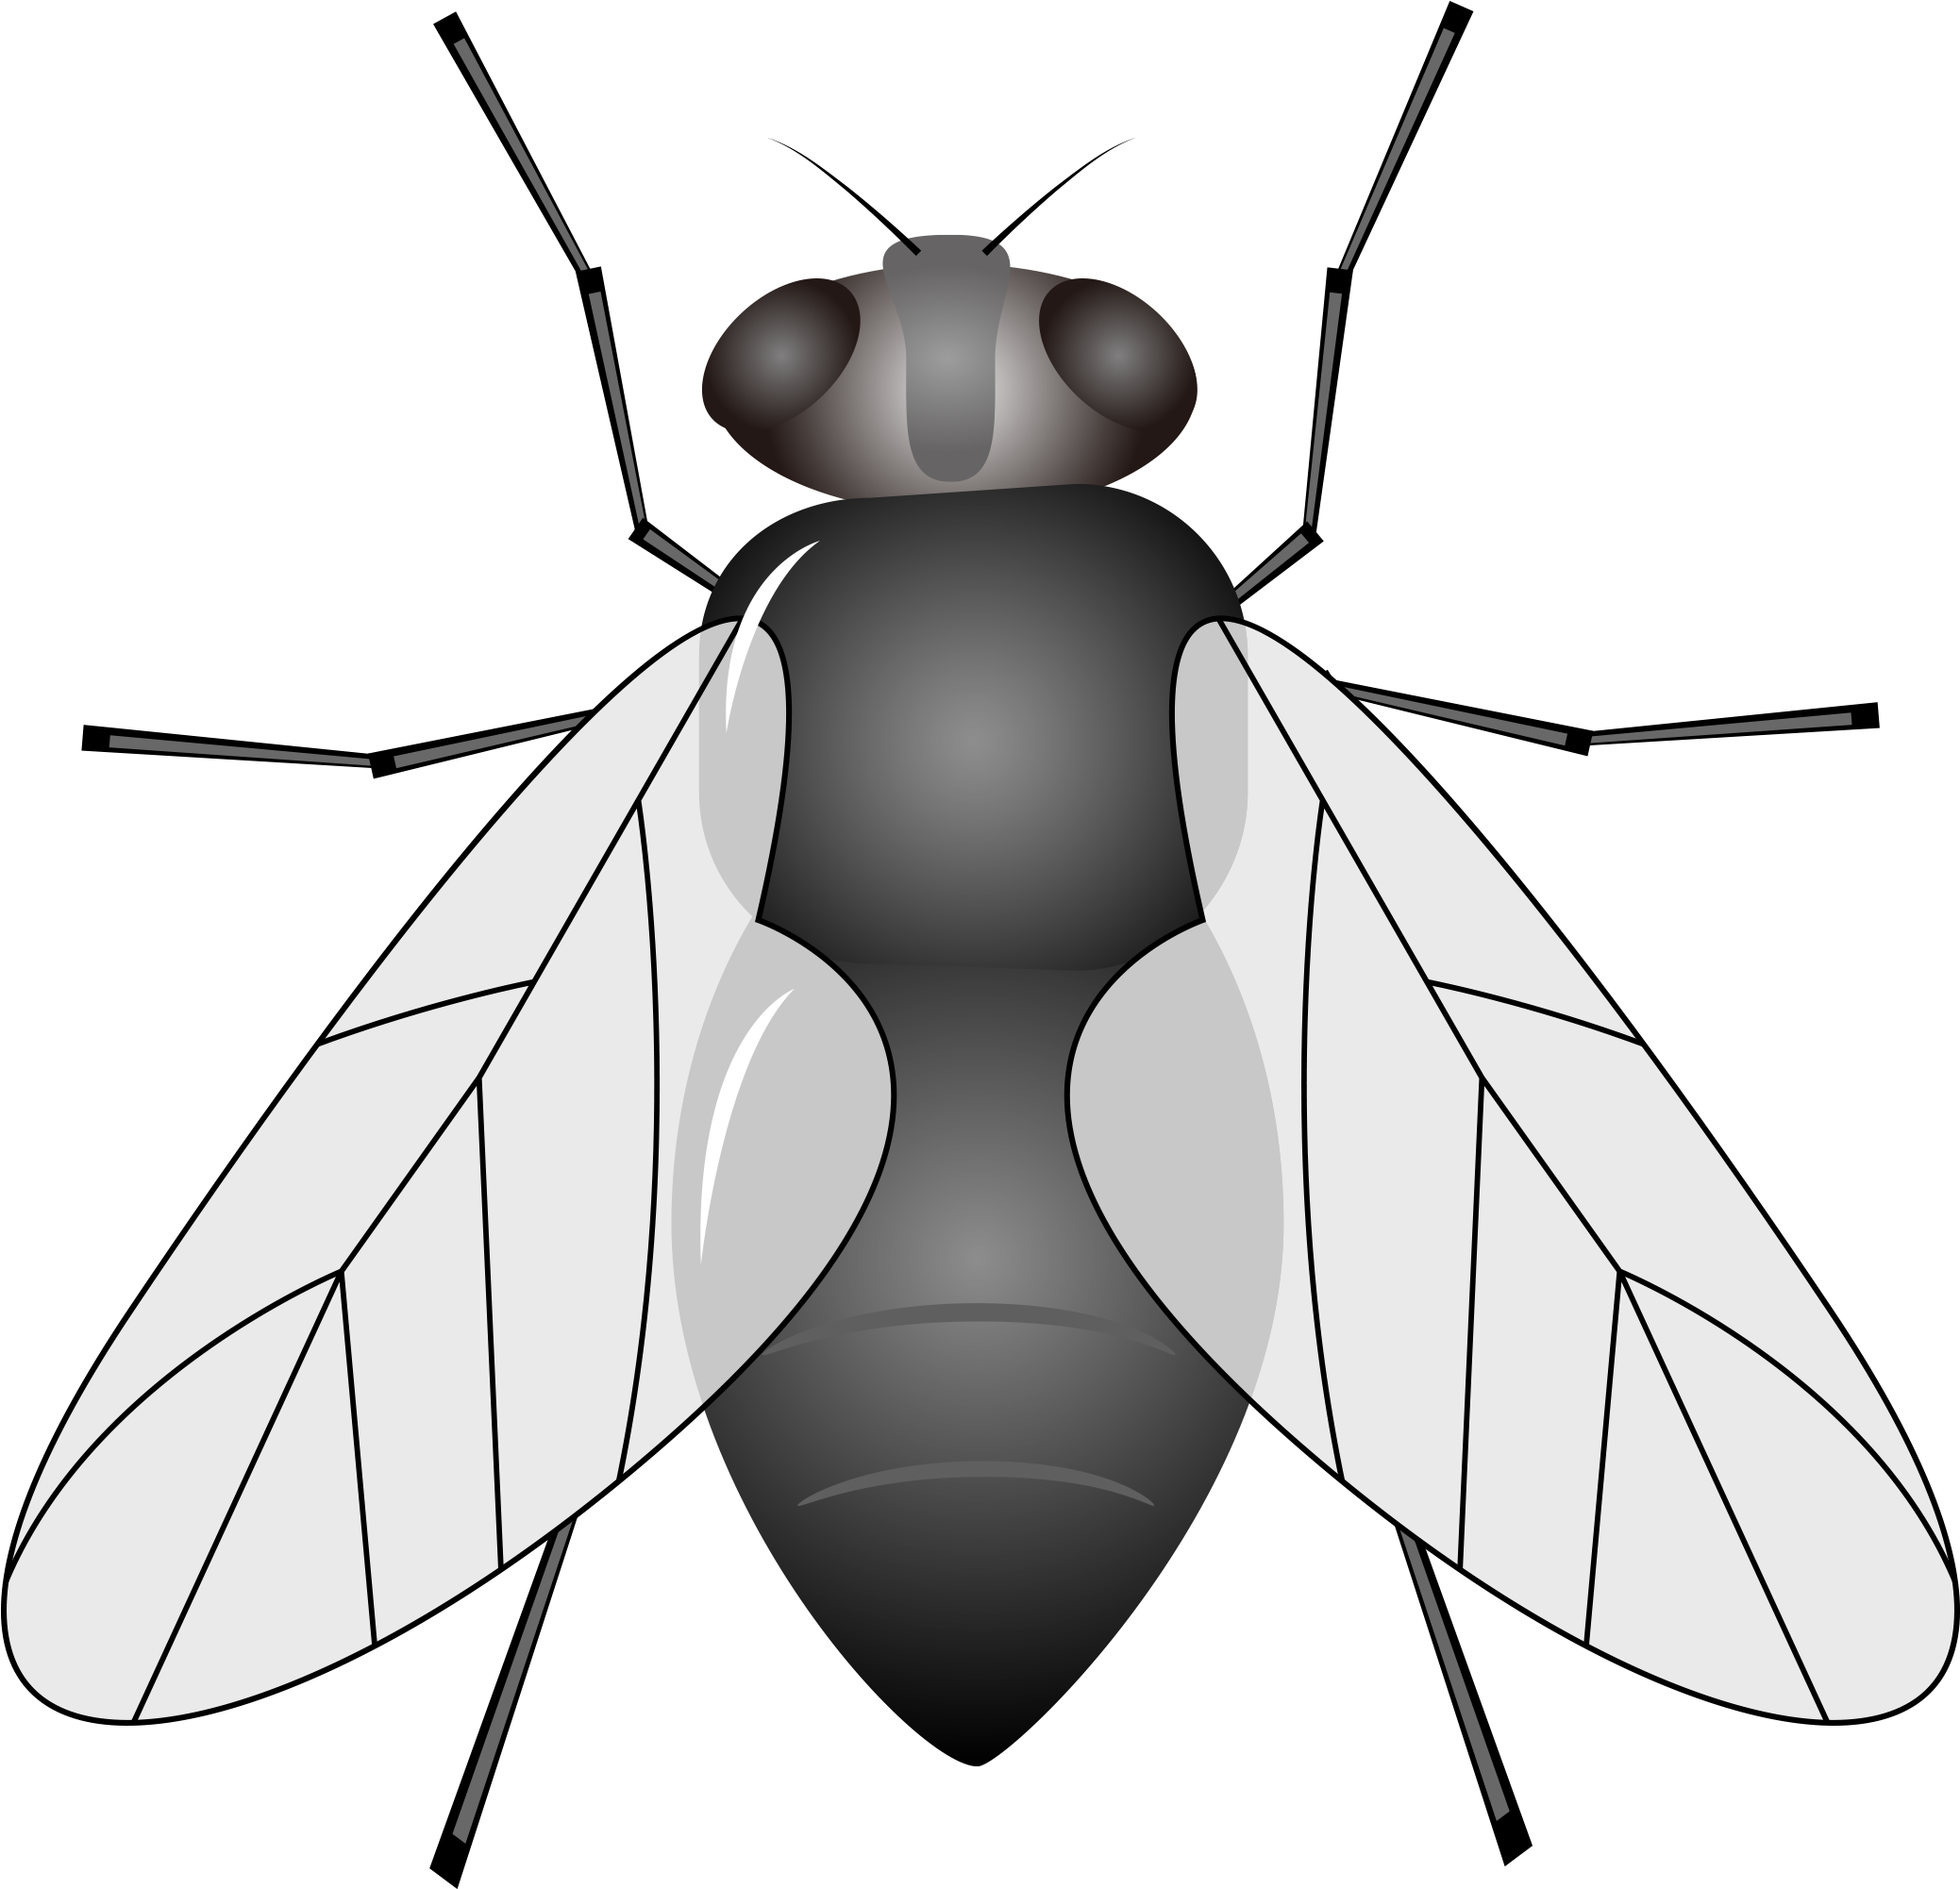 Insect Housefly Animal Clip Art - Printable Images Of Housefly (2169x2169)